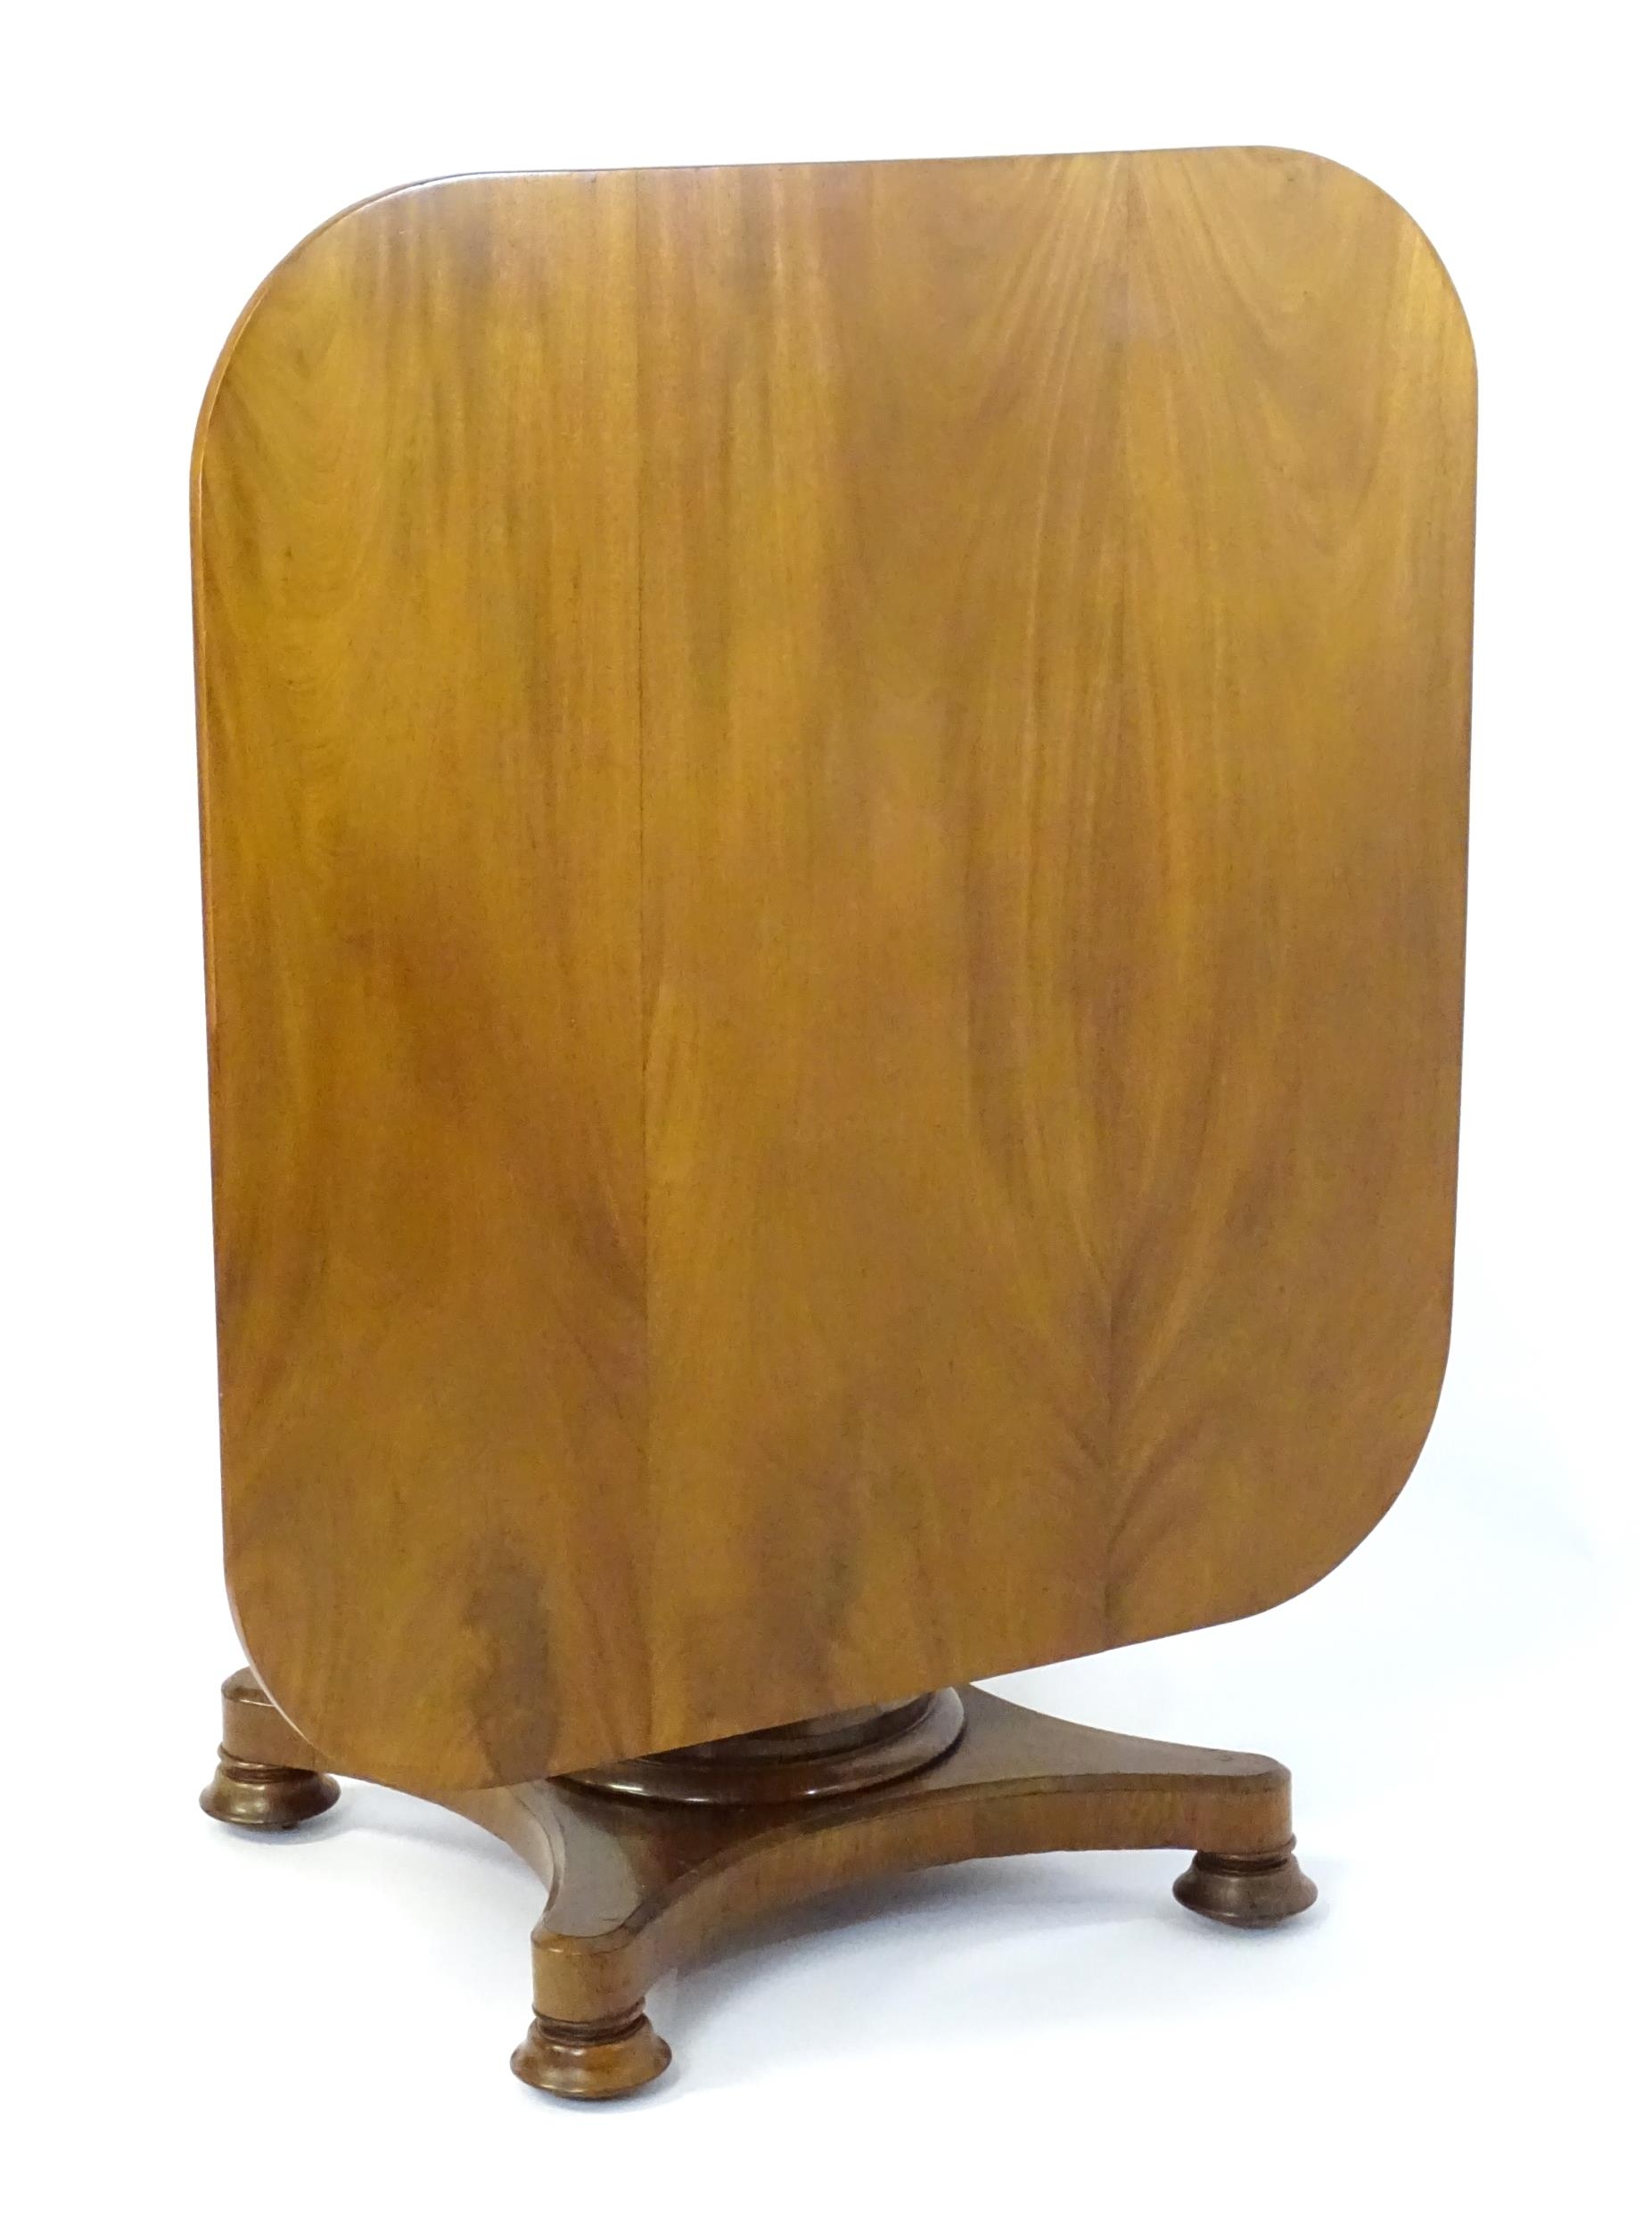 A Victorian mahogany tilt top table with rounded edges and standing on a pedestal base with - Image 2 of 8